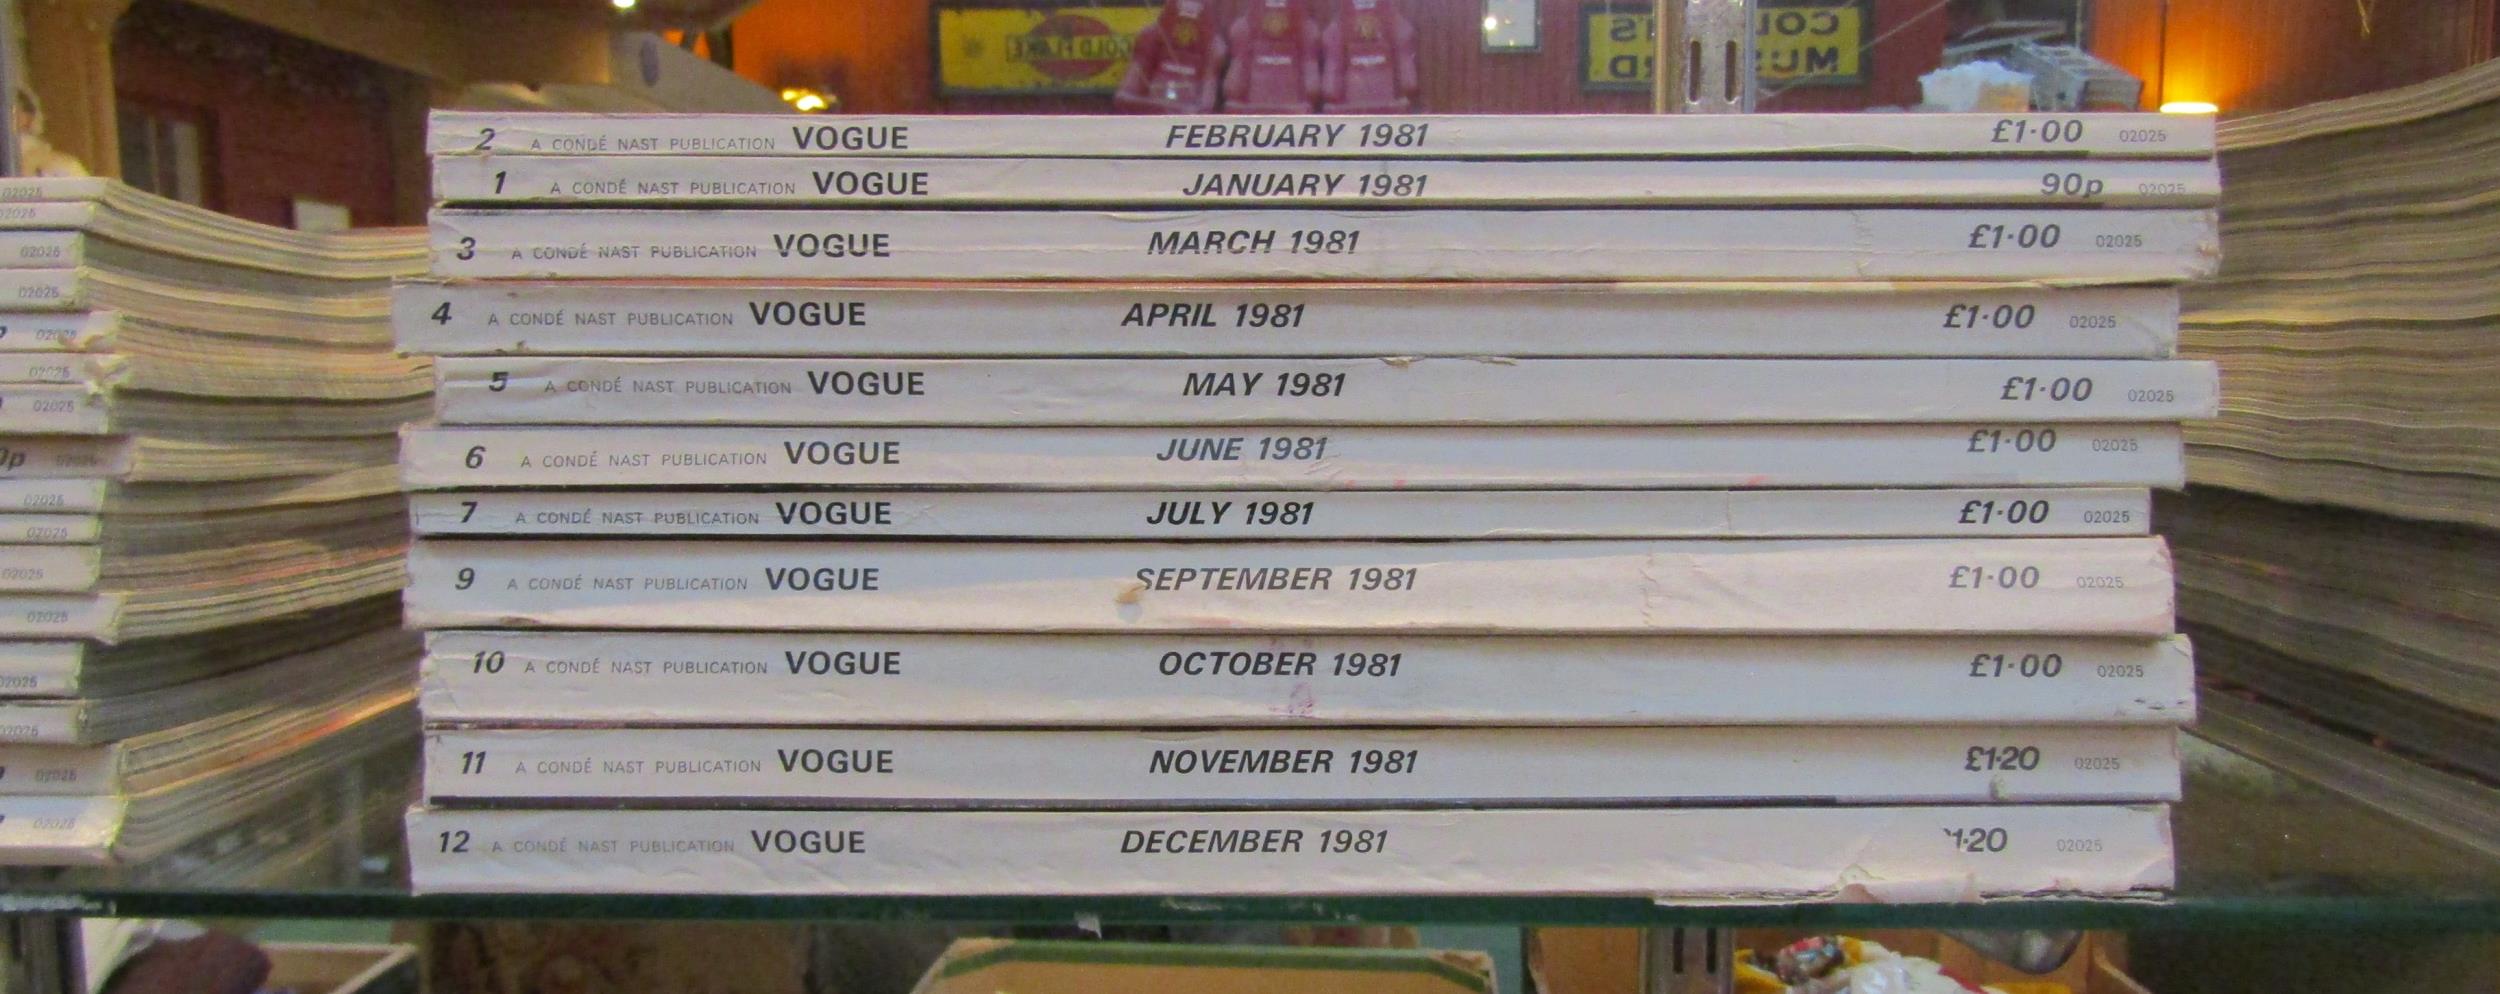 British Vogue magazine 1980 - January (1), February (2), March 1st (3), March 15th (4), April 1st ( - Image 3 of 40